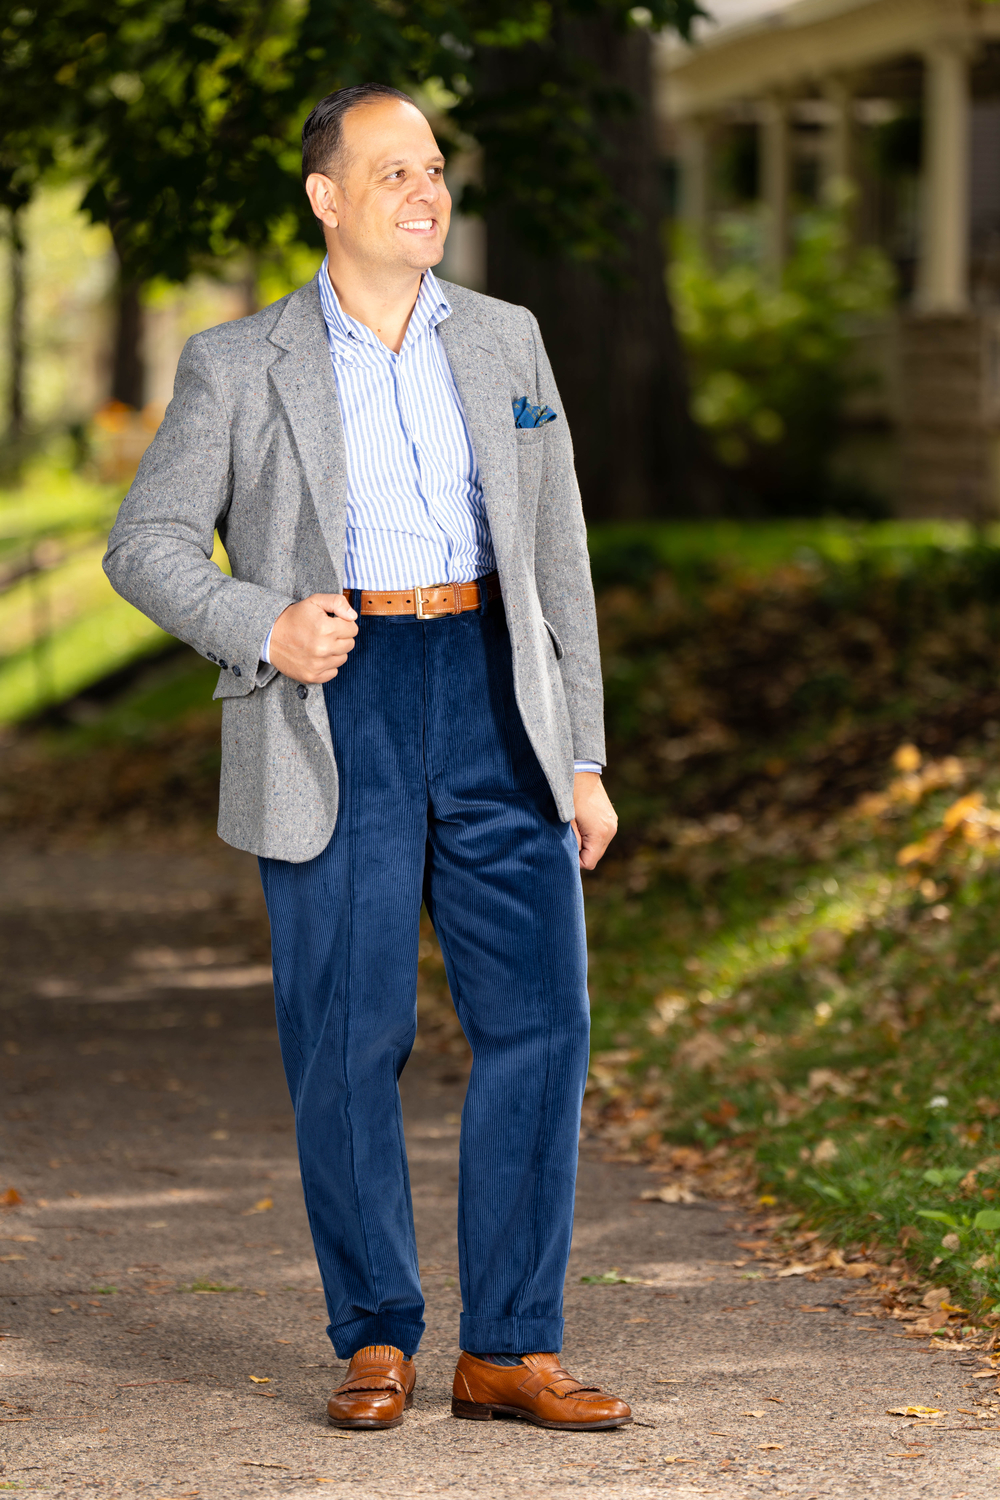 Raphael wearing Stancliffe Corduroy Flat Front Trouser in Infantry Blue